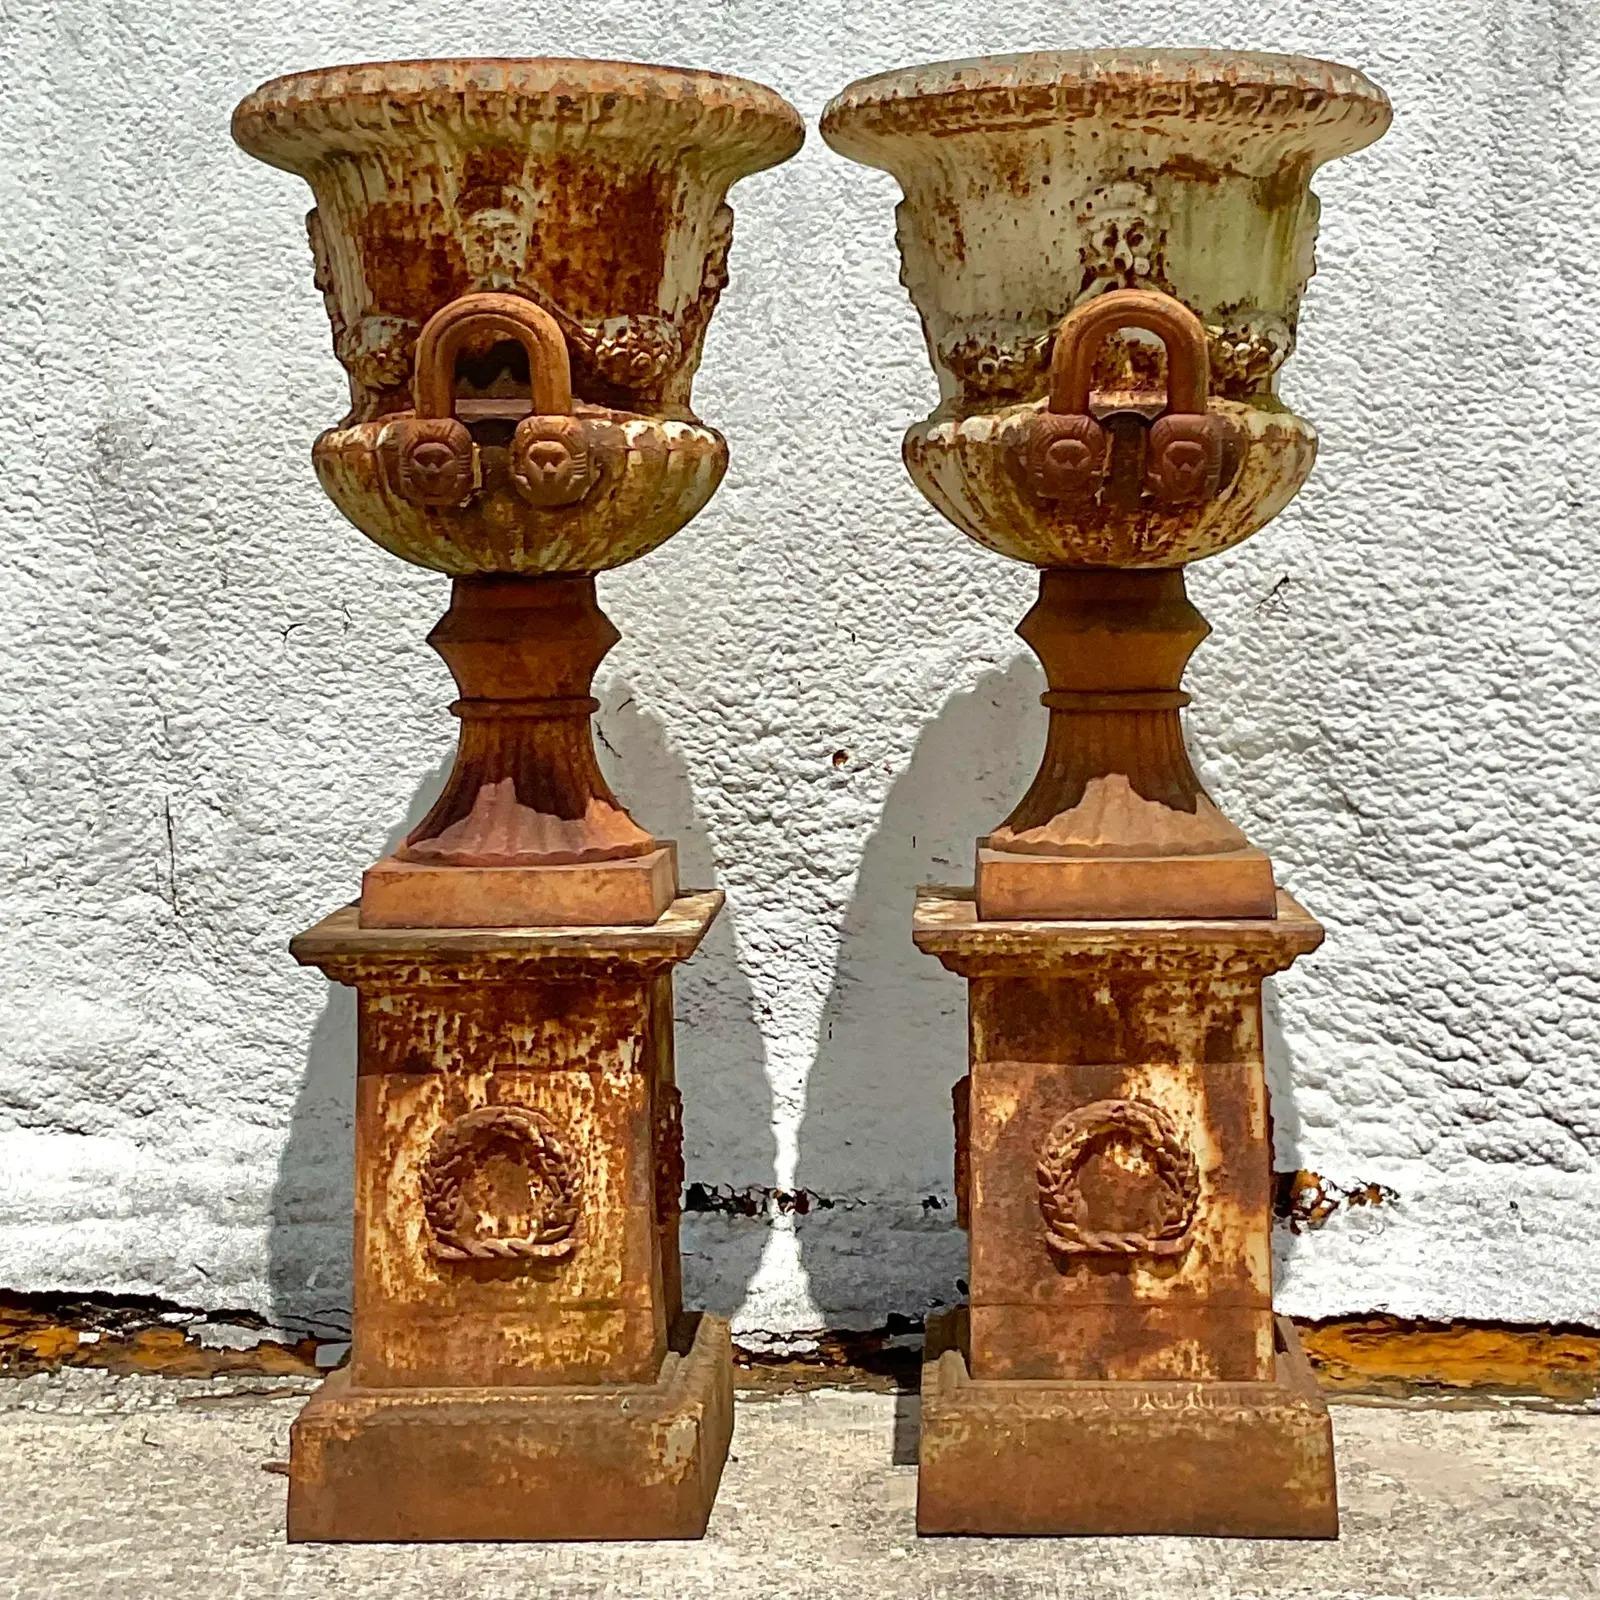 Fantastic pair of vintage Garden urns. Monumental in size and drama. Freestanding urns with swags and garlands and masks that rest on a matching plinth. Tons of good rusty patina from time. Acquired from a Palm Beach estate.